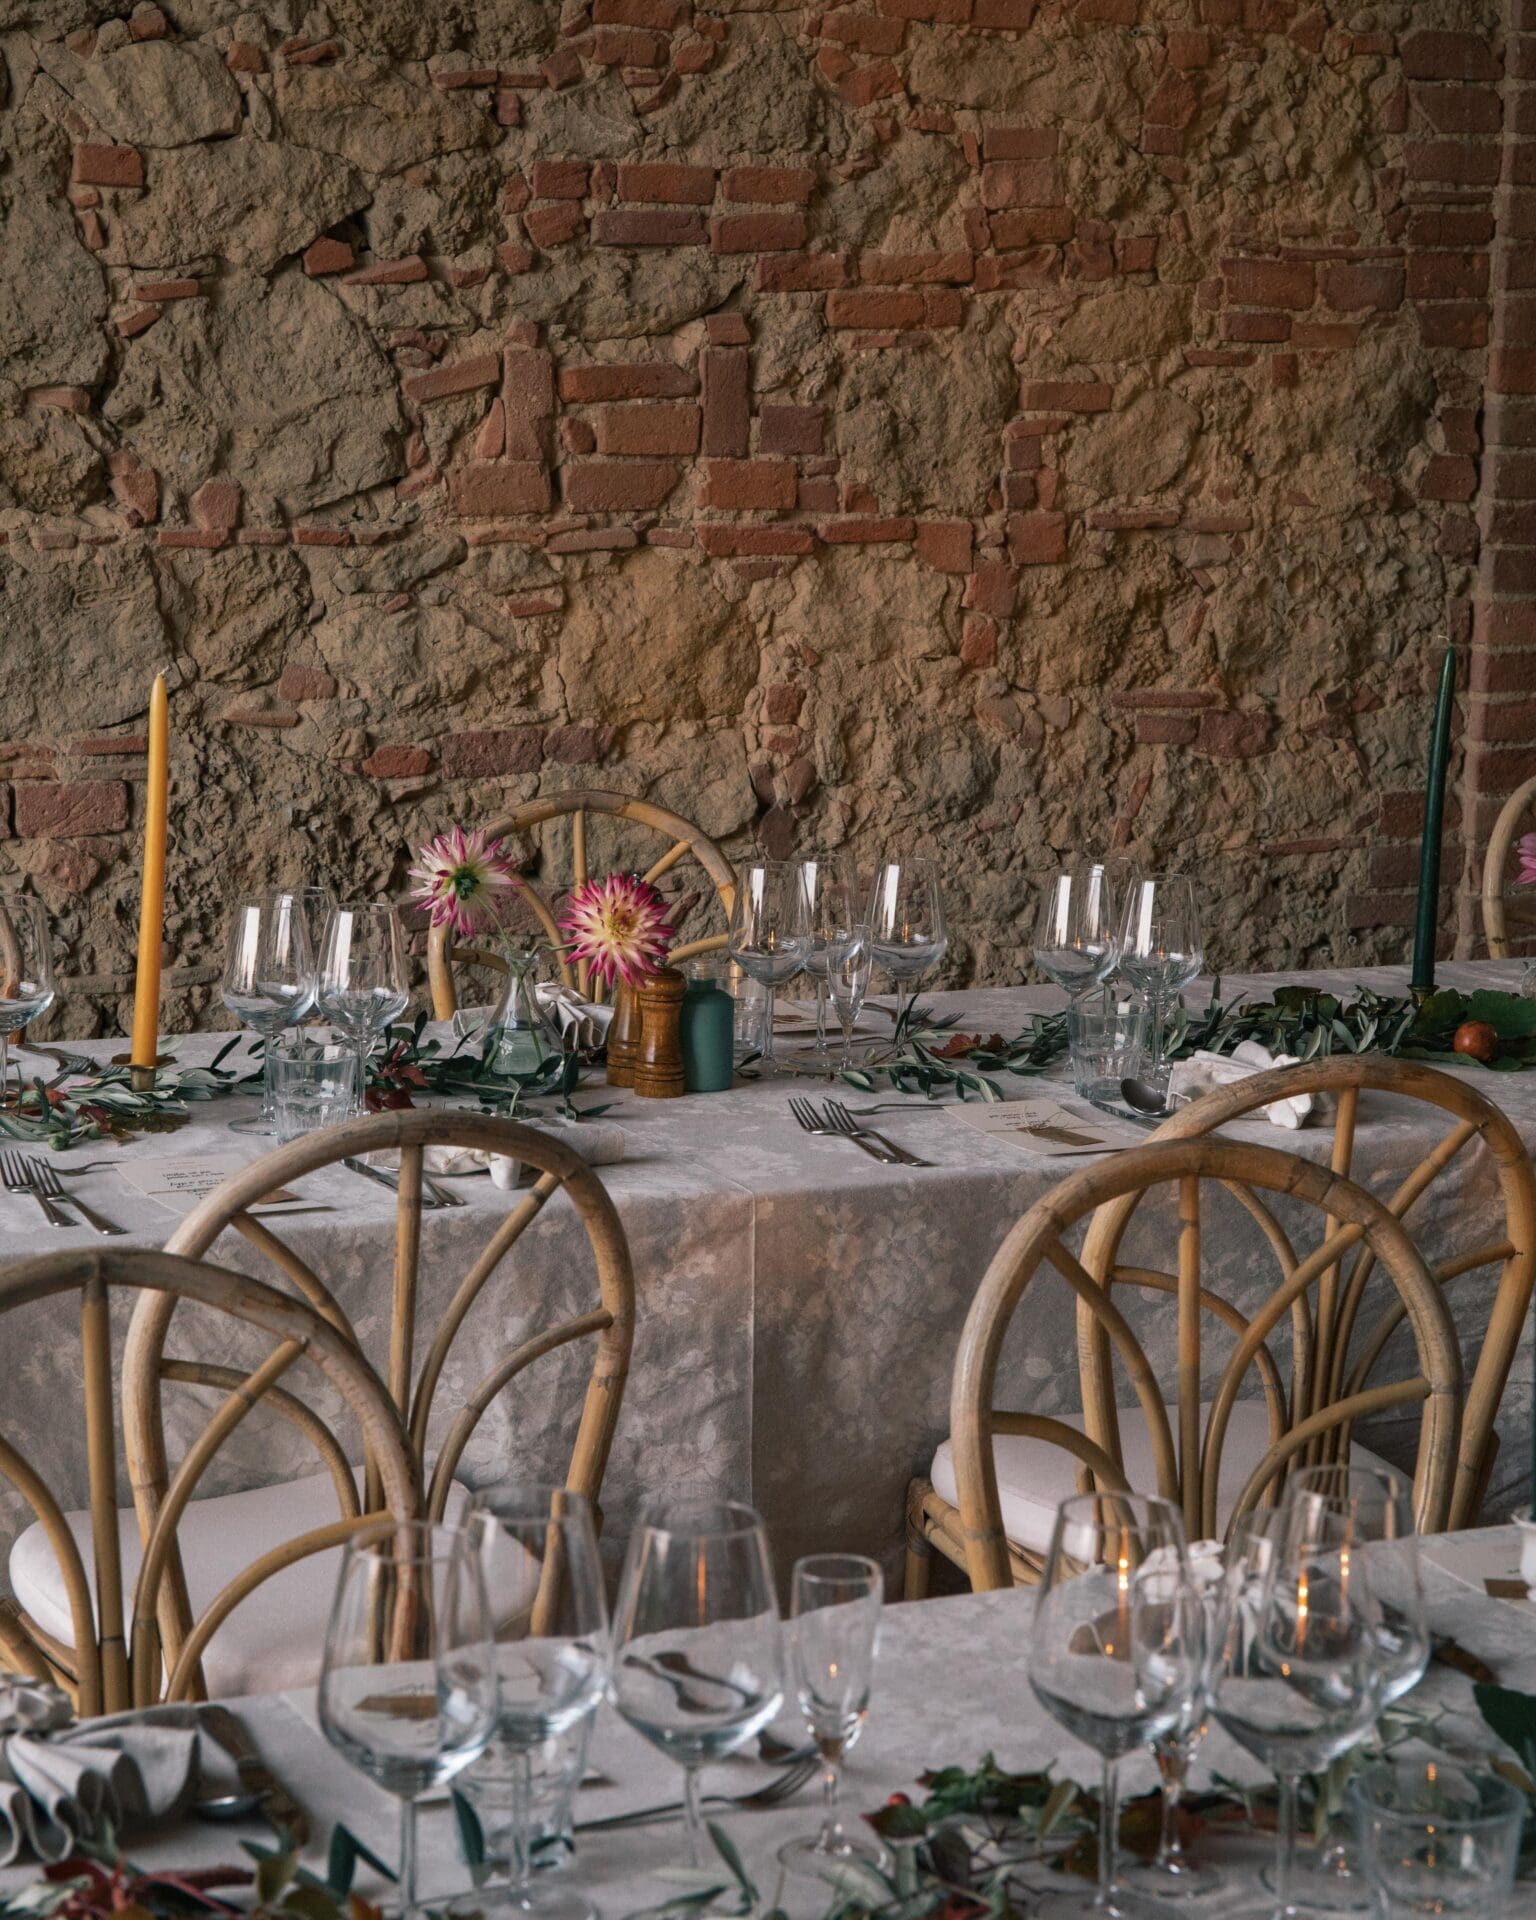 Inside Villa Lena: an art retreat and hotel in the Tuscan hills | Table set in front of brick wall for a event at Villa Lena